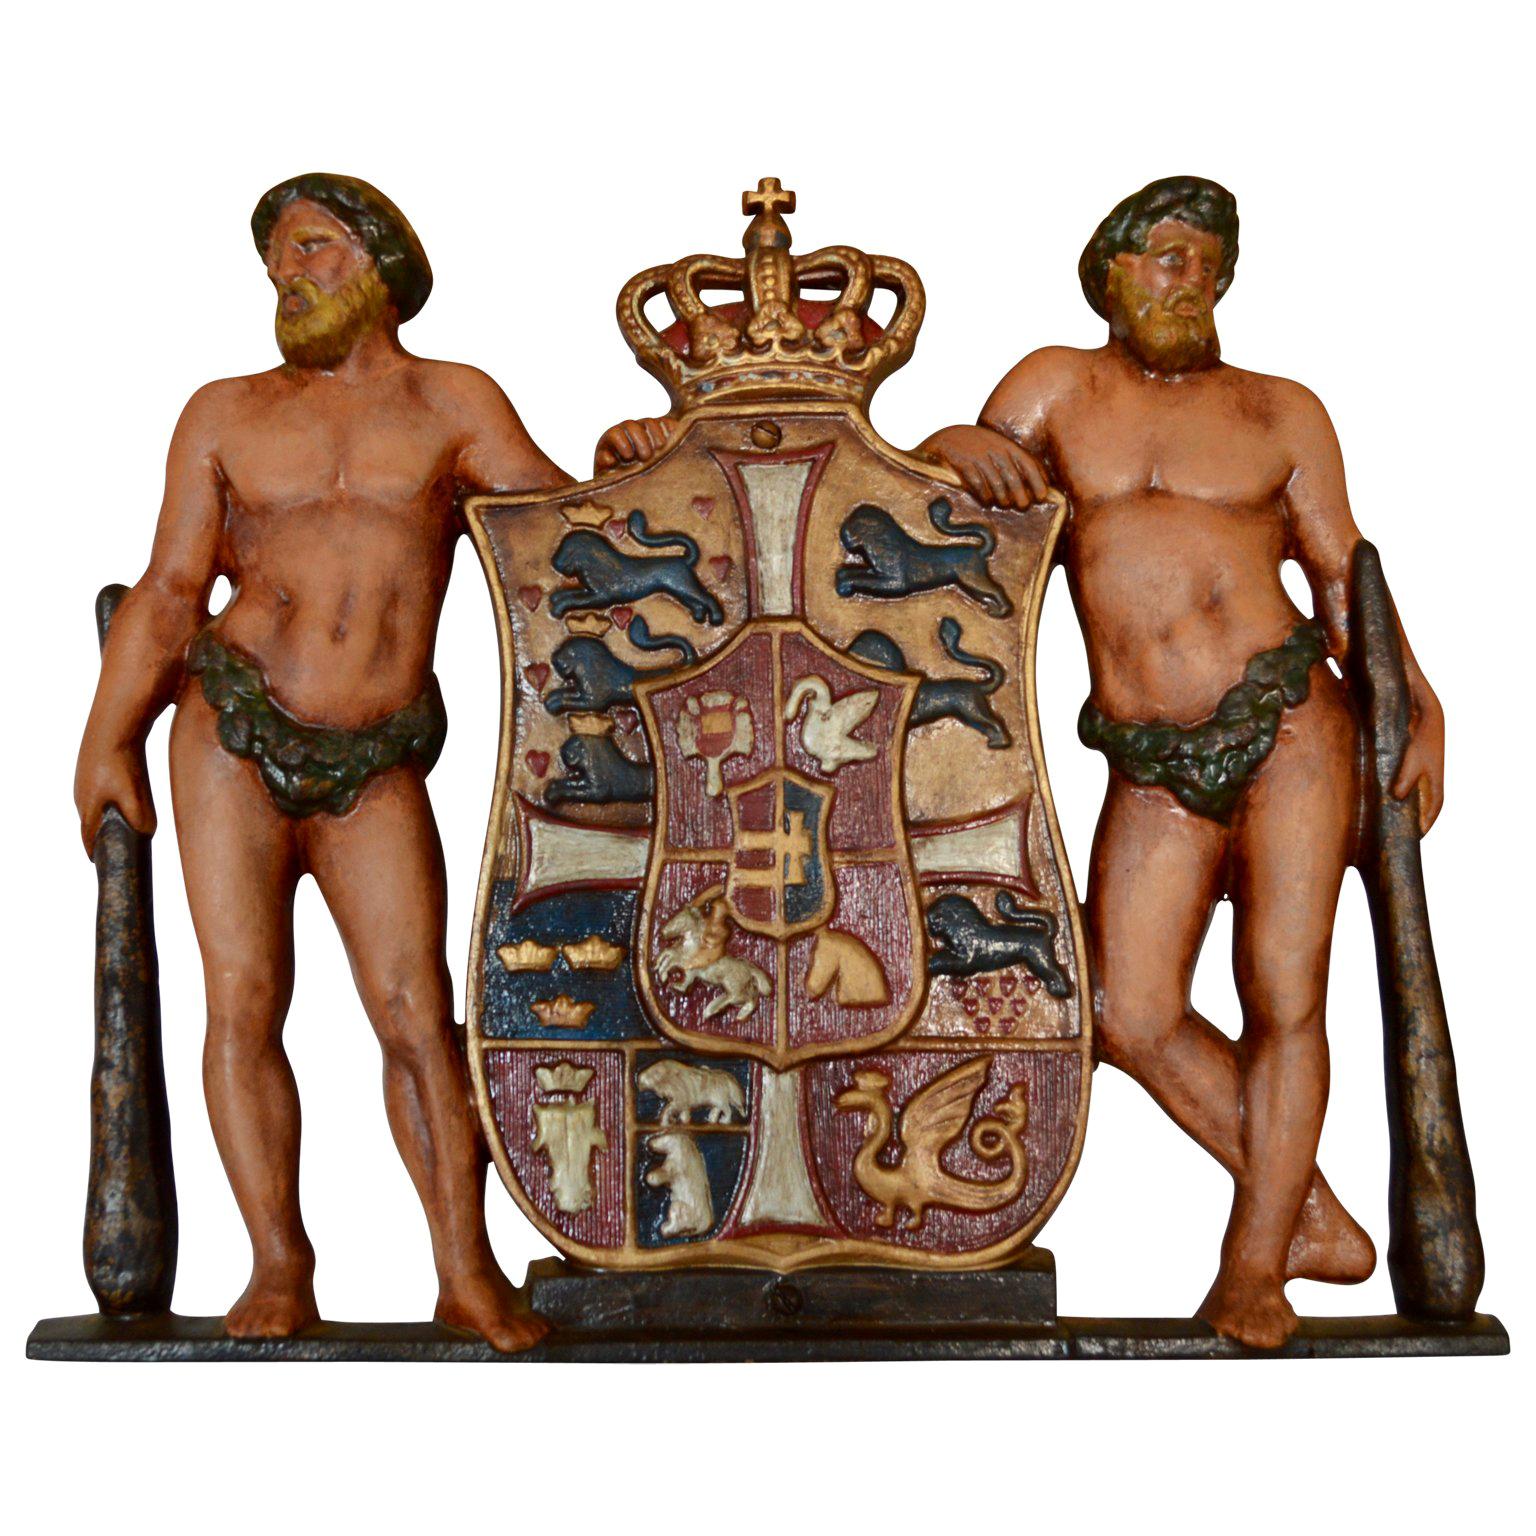 The Royal Danish coat of arms in painted on cast iron, as it was used between year 1819-1903. It was the first edition after the removal of the Norwegian lion, and the last that used the traditional Icelandic coat of arms, a crowned silver stockfish